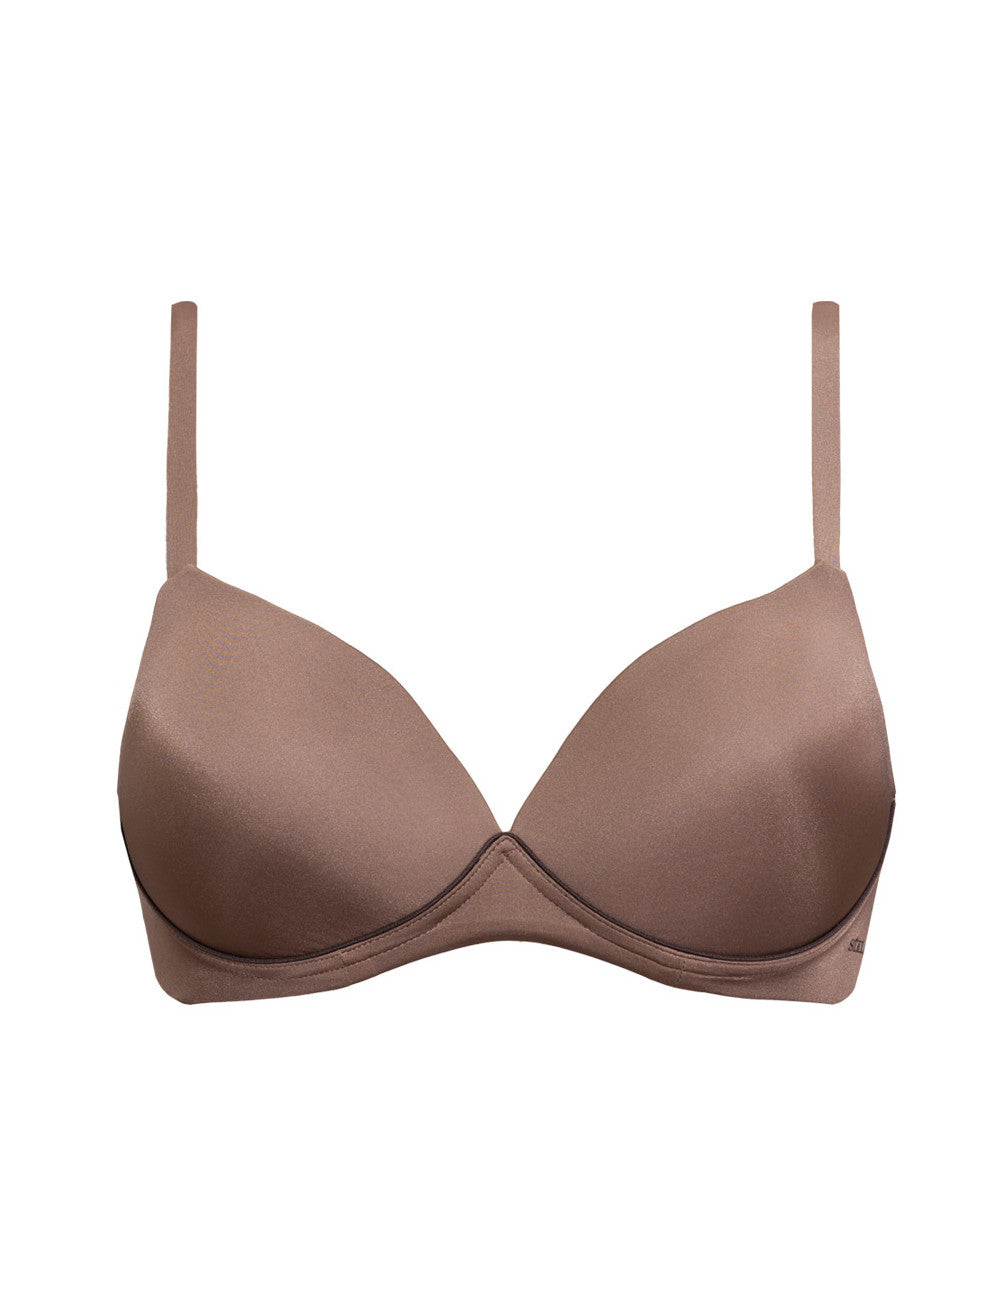 The SIÉLEI Fantastic line features this lightweight, lightly-padded bra which offers a smooth contour and subtle luster.